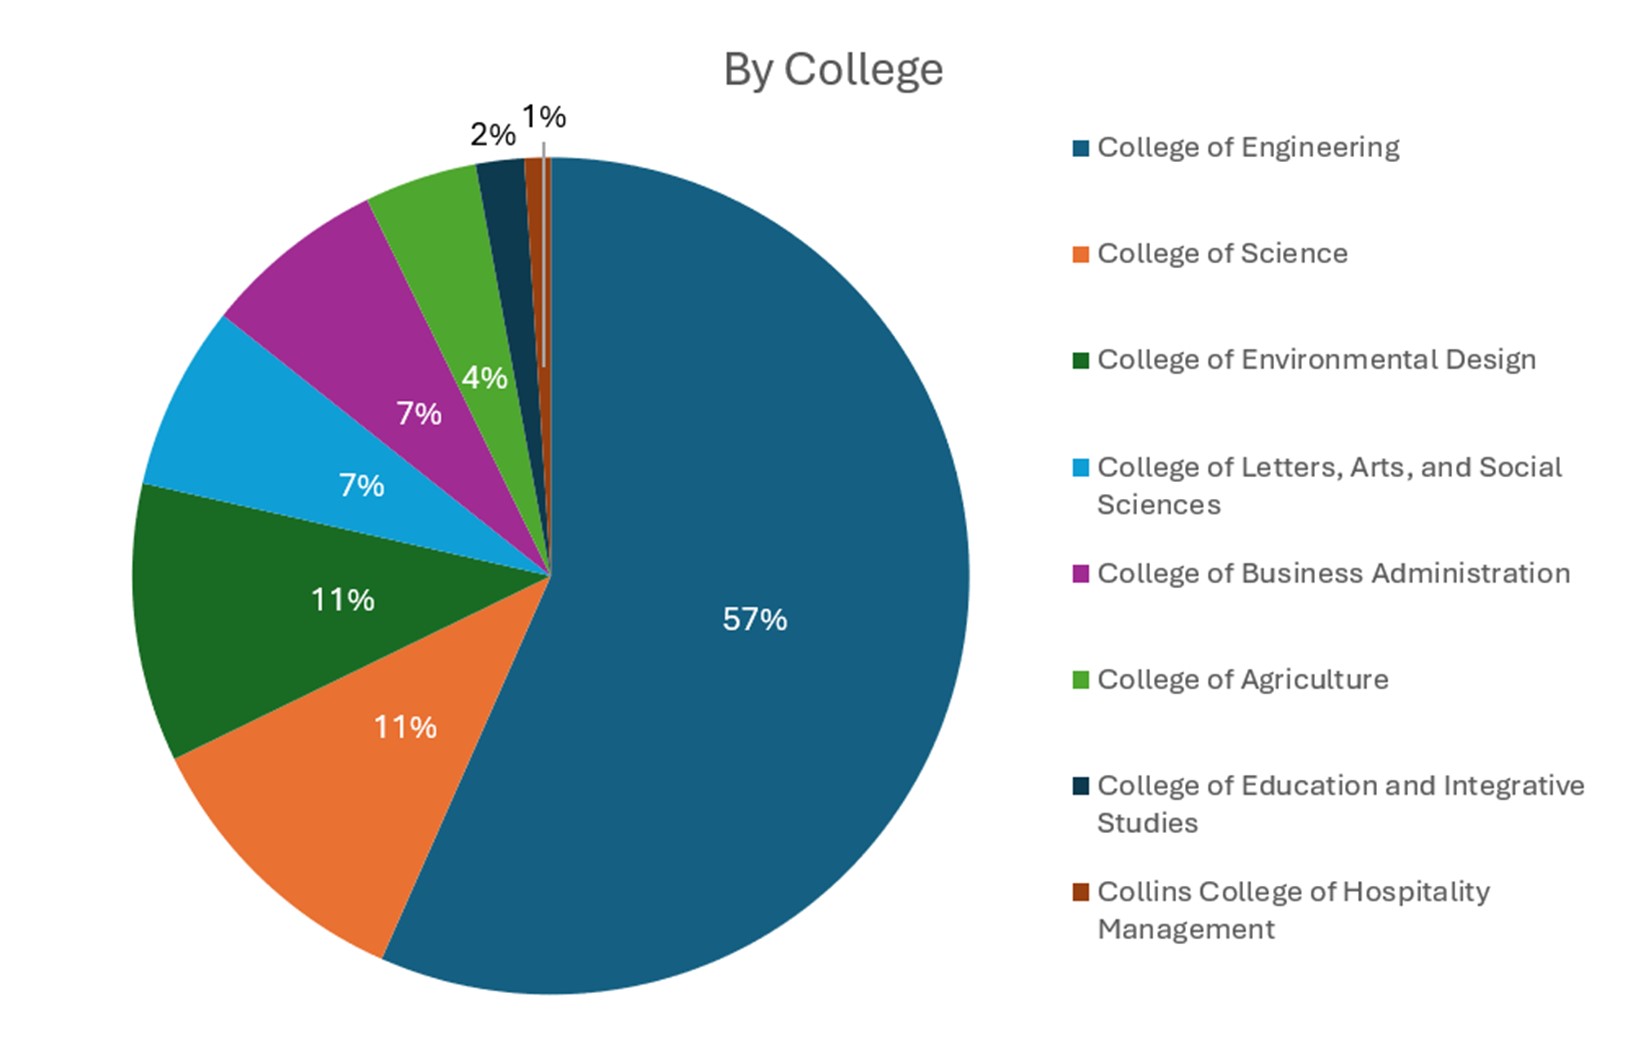 Pie chart showing percentages of unique people completing training grouped by college